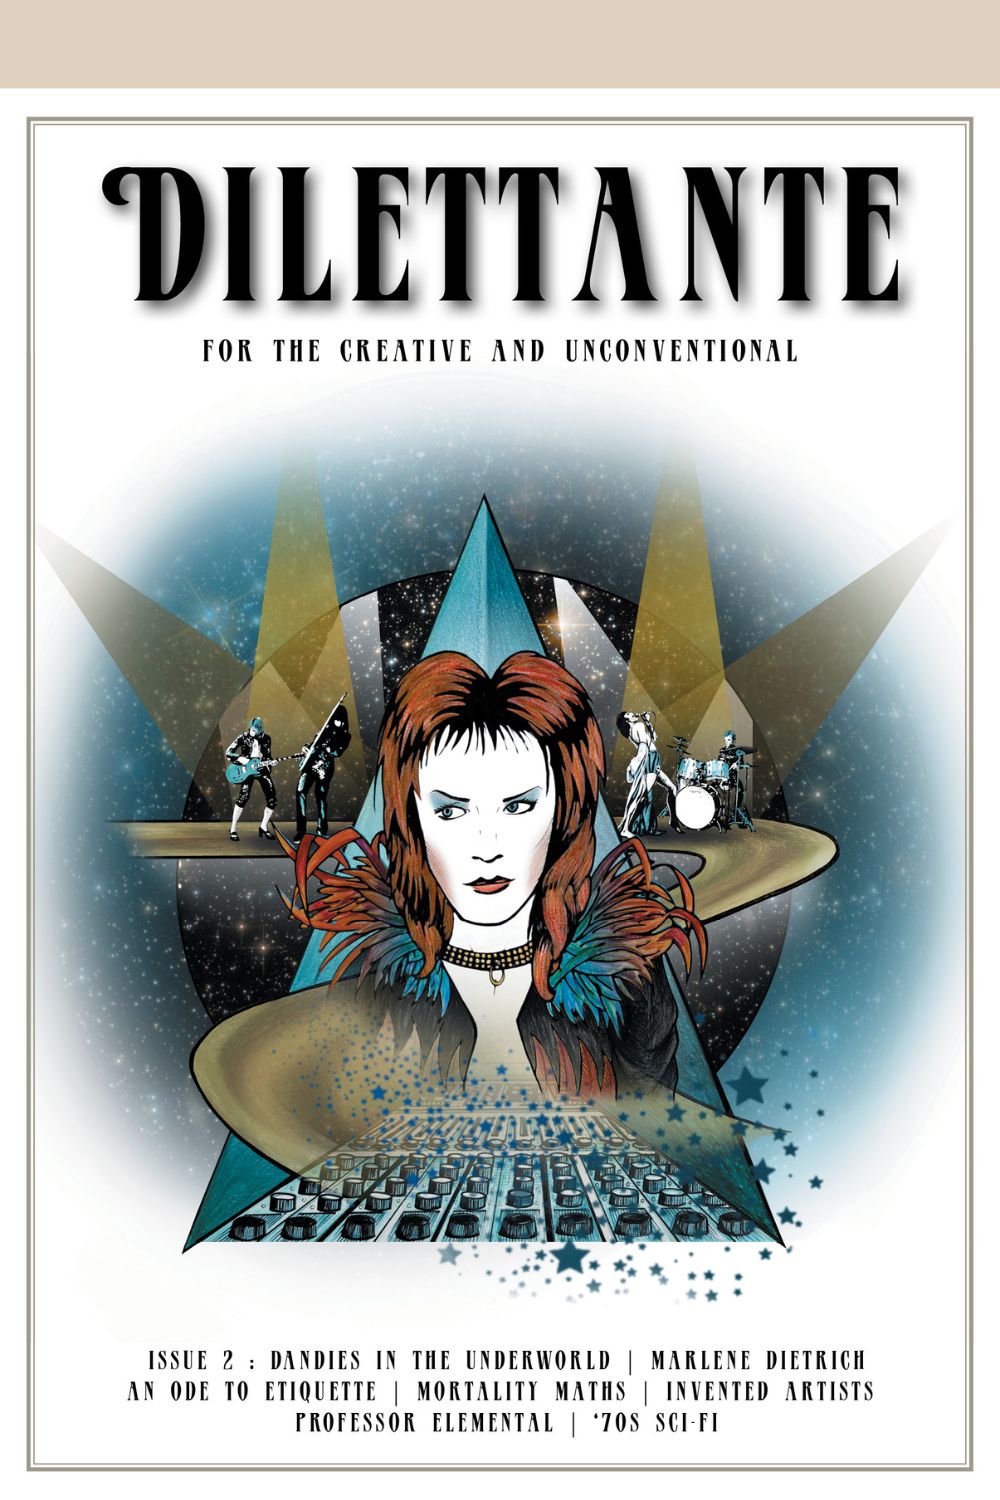 The Dilettante Magazine Issue 2